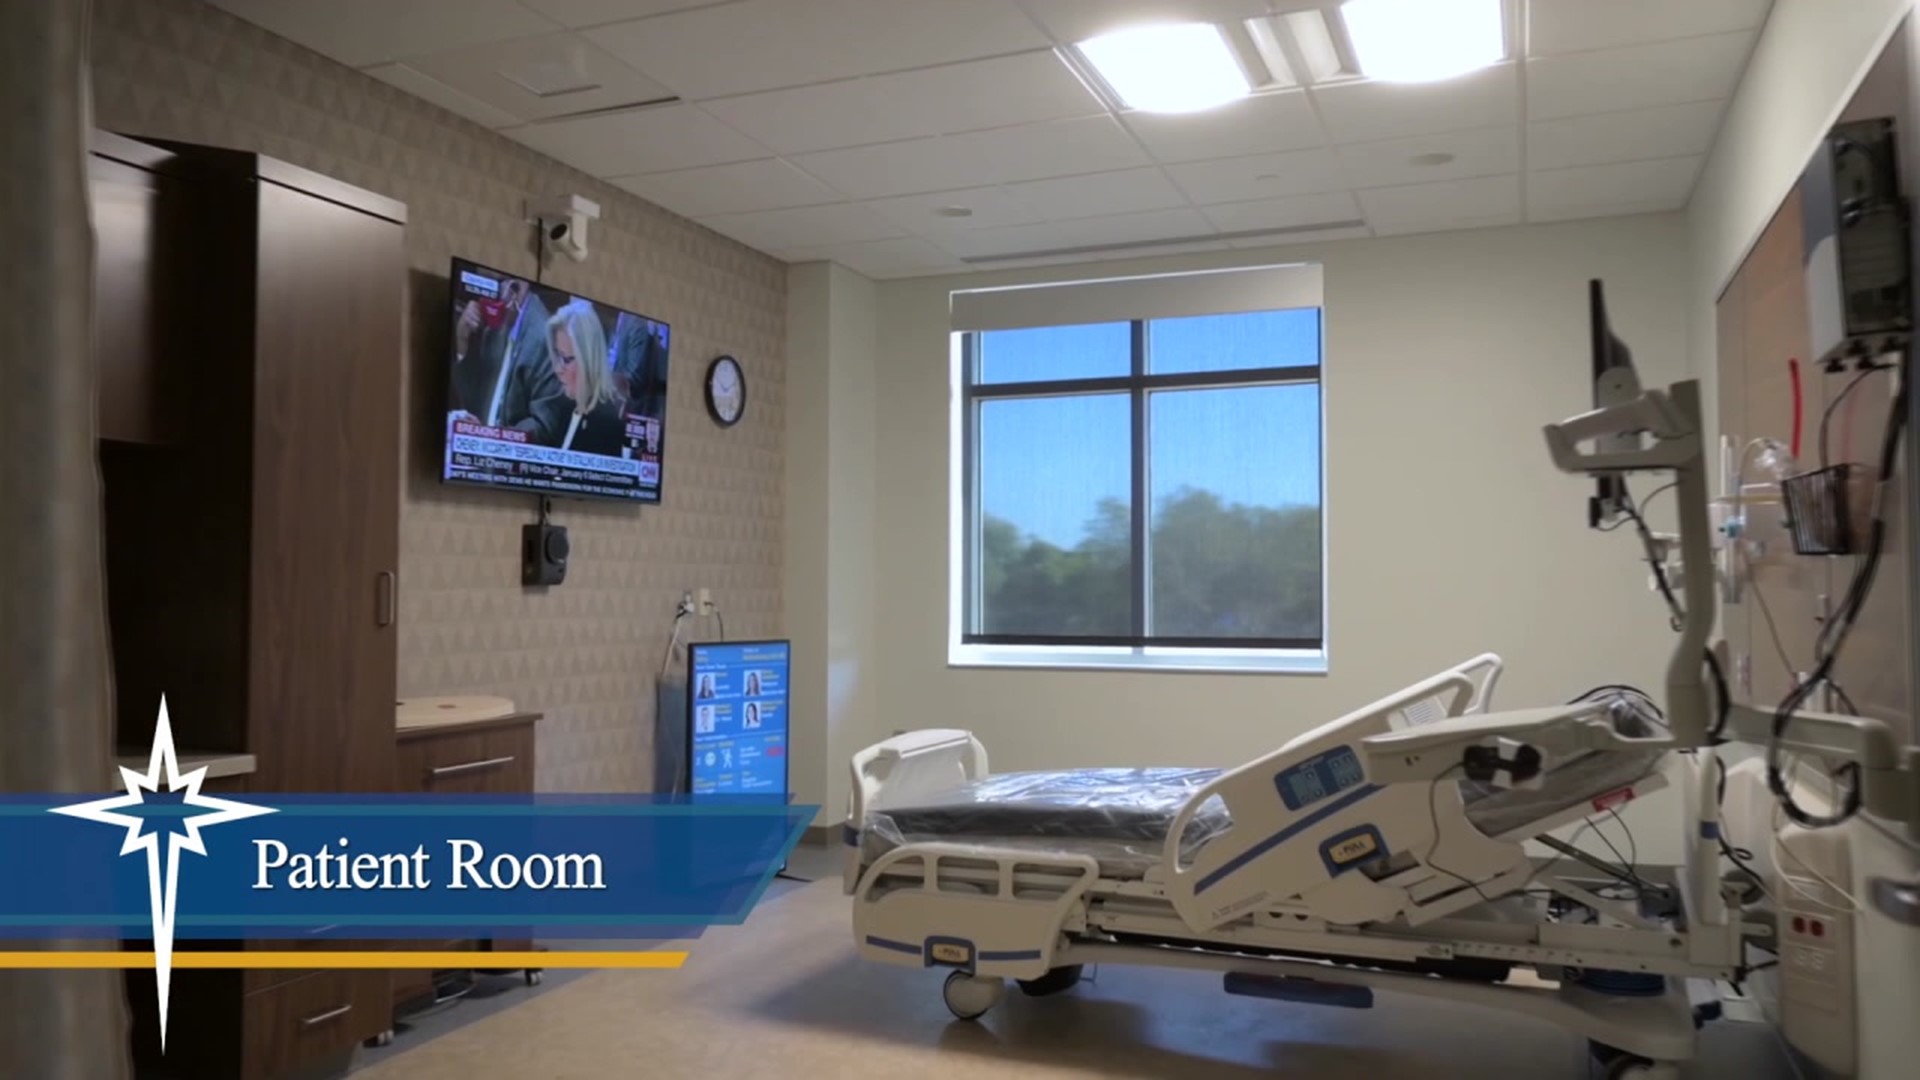 When opened, Saint Luke's Carbon Campus will be the largest acute-care hospital in the county.